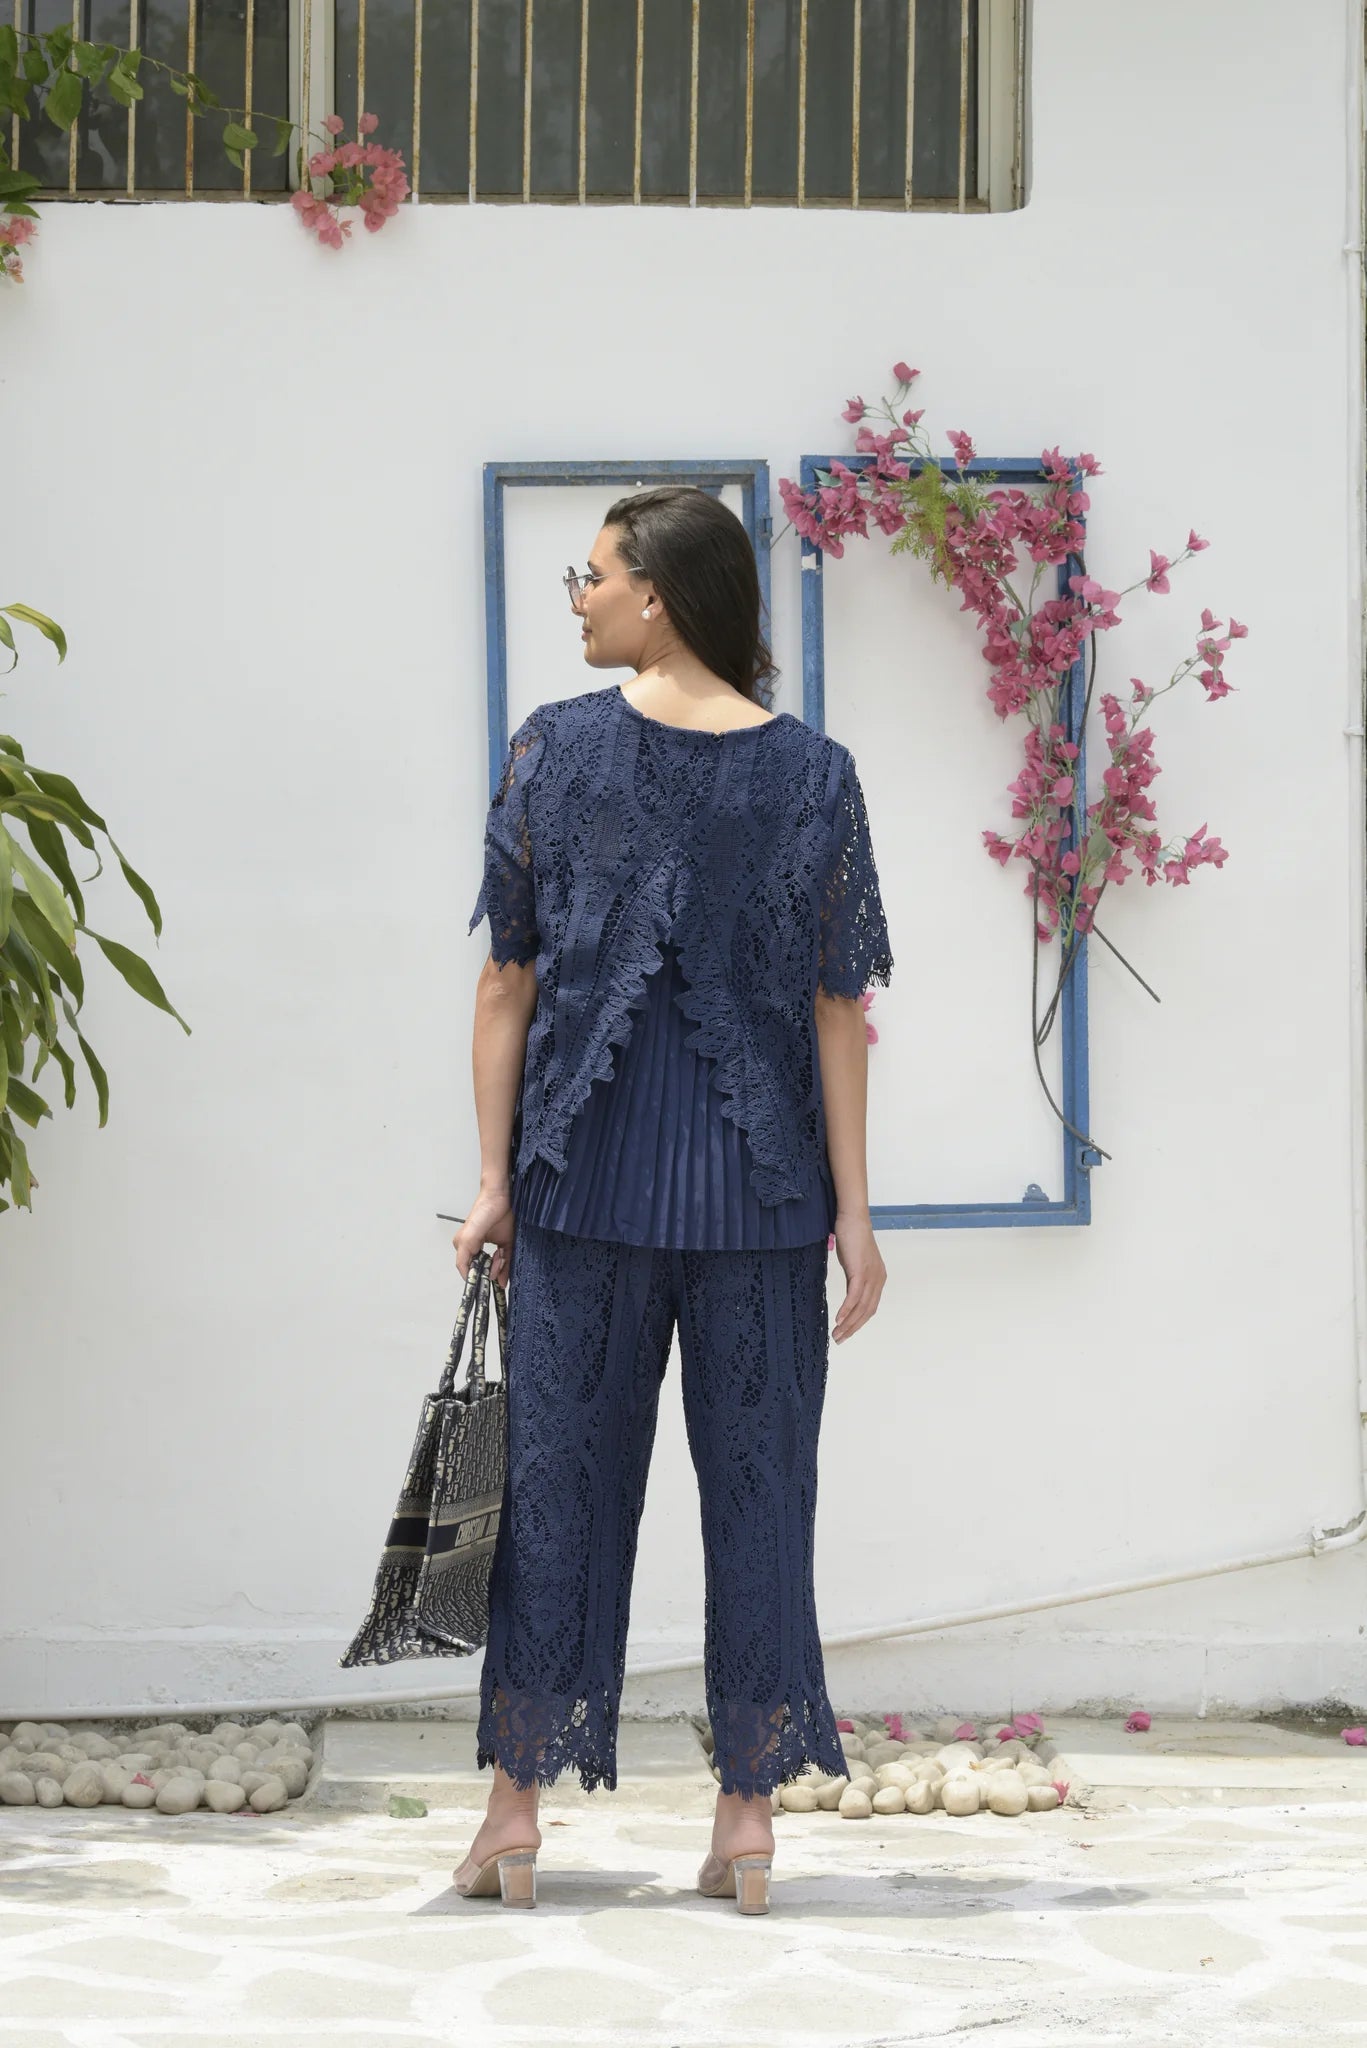 Image of Send subtle hints of elegance in the MYRA Mesh Cross Back Co-ord set. This two-piece set comes in a midnight blue color, and features a delicate mesh cross-back for a subtle hint of sophistication. Enjoy the perfect mix of style and comfort with MYRA. From savoirfashions.com